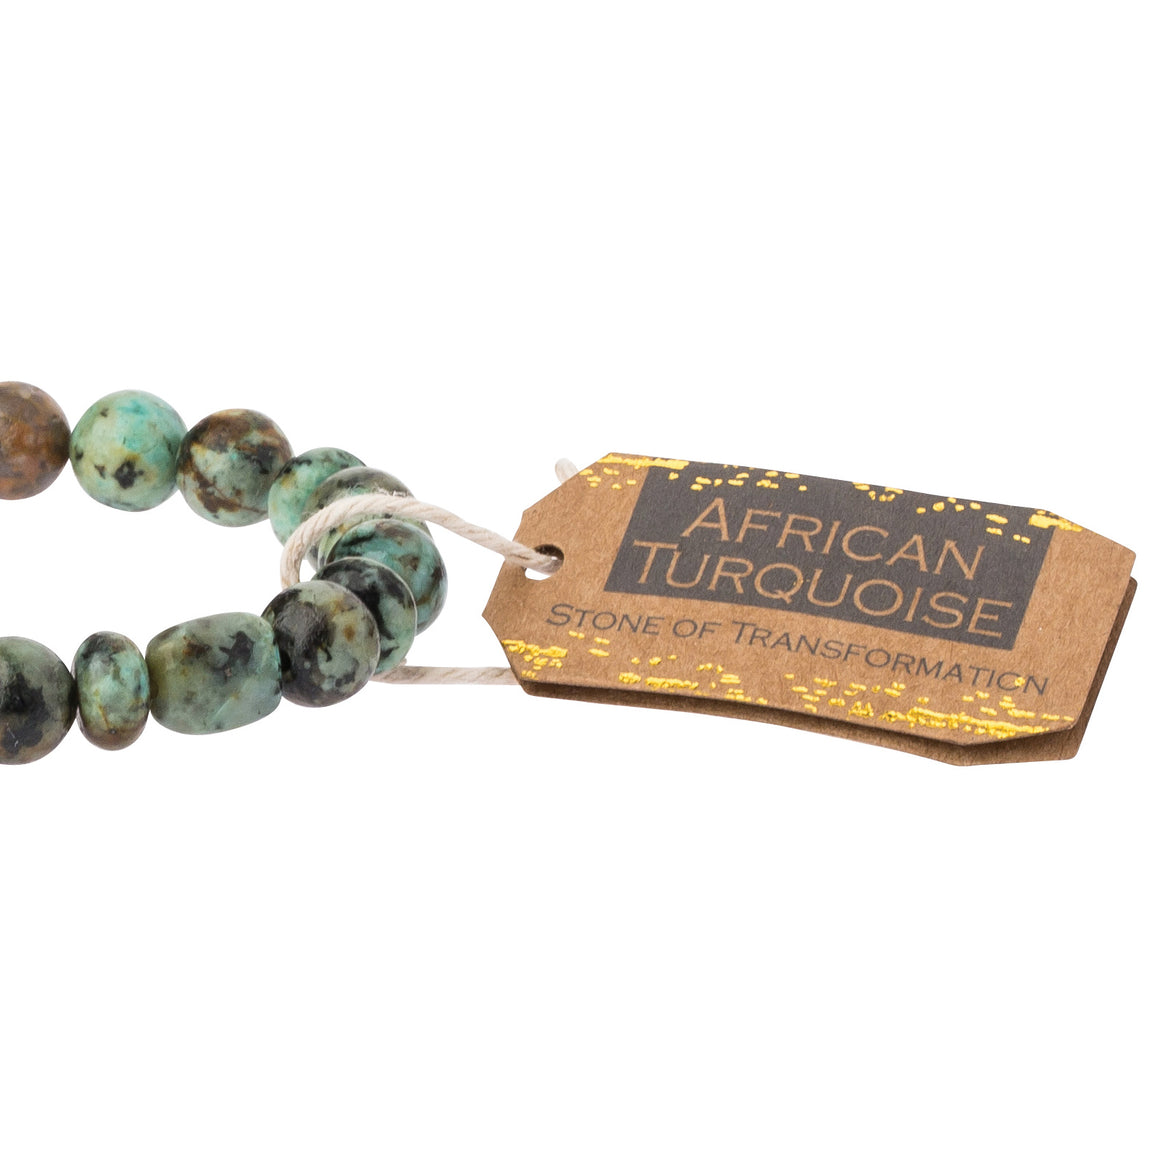 African Turquoise Stone Bracelet - Stone of Transformation